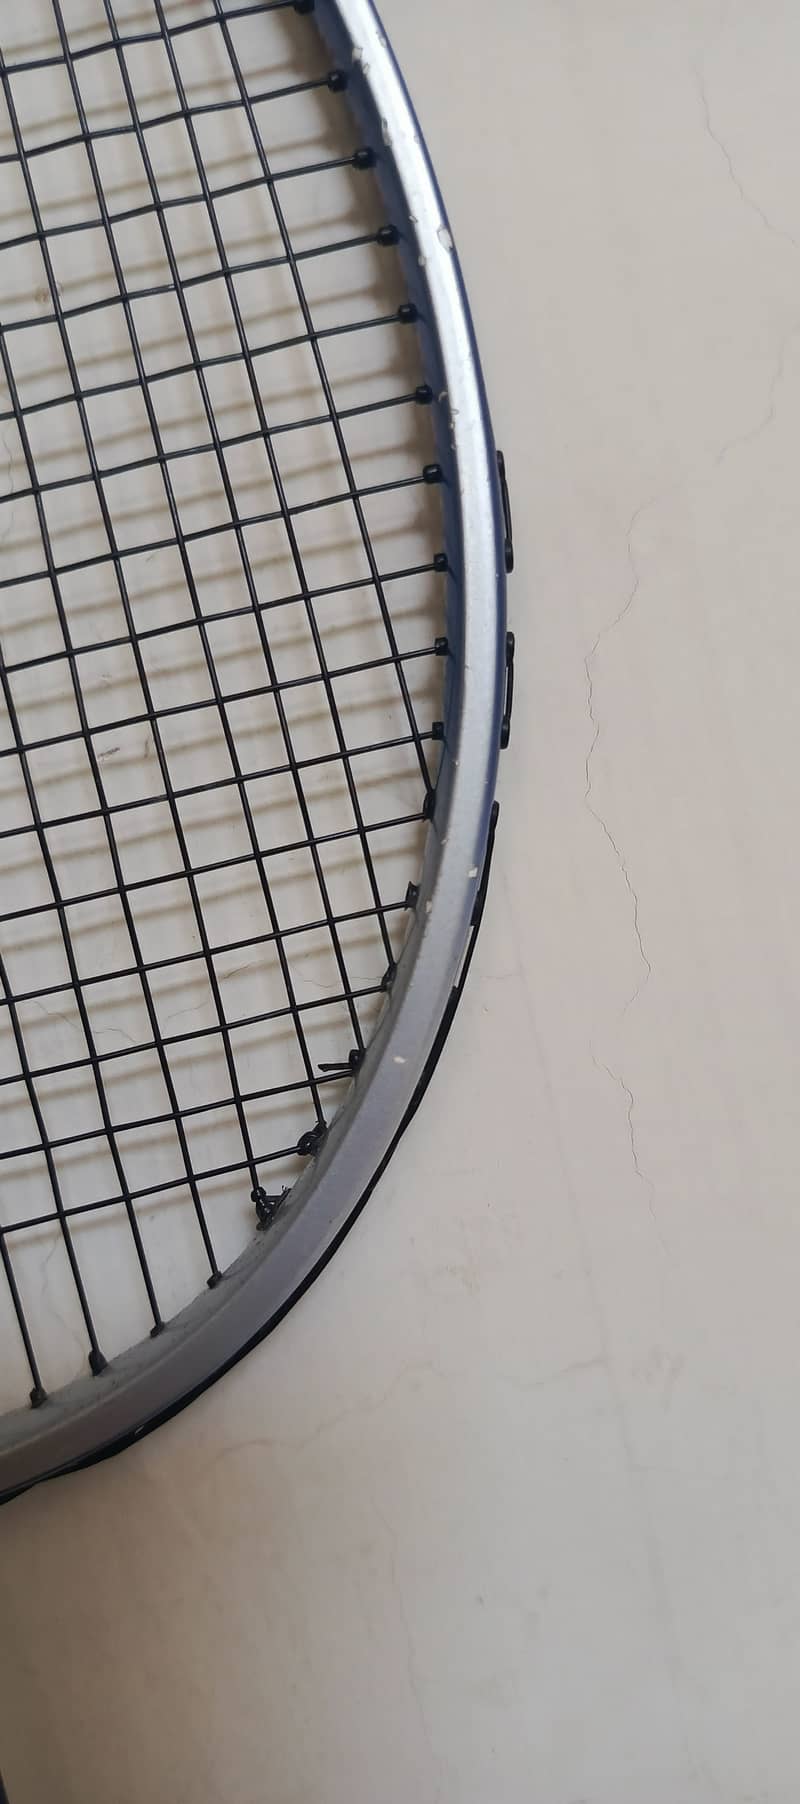 Badminton Racket | Hiqua 150 made in USA weight 84 tension 28 lbs 12